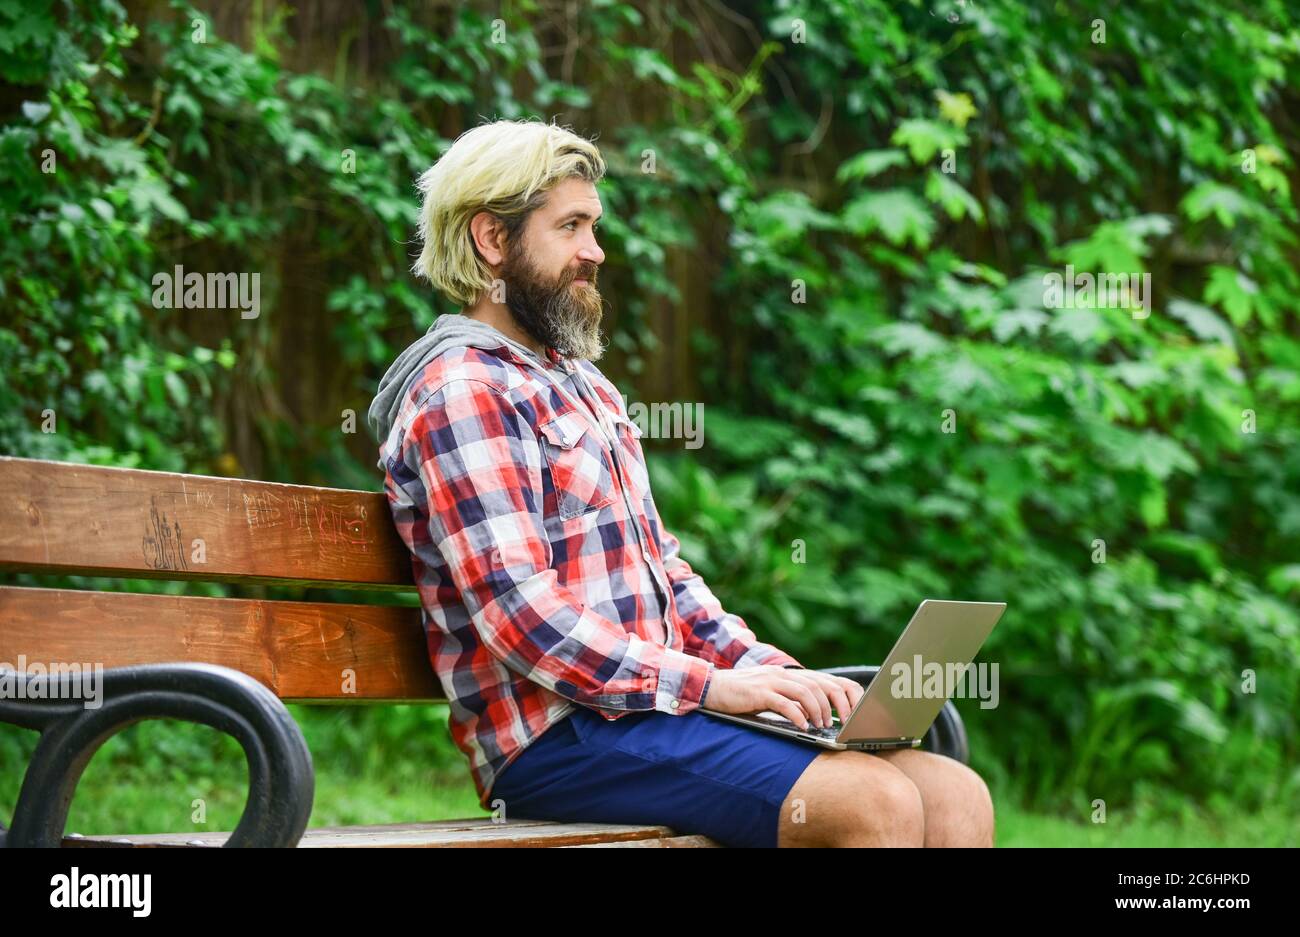 Remote job. Online shopping. Agile business. Bearded guy sit bench park nature background. Work and relax. Working online. Hipster inspired work in park. Fresh air. Mobile internet. Modern laptop. Stock Photo